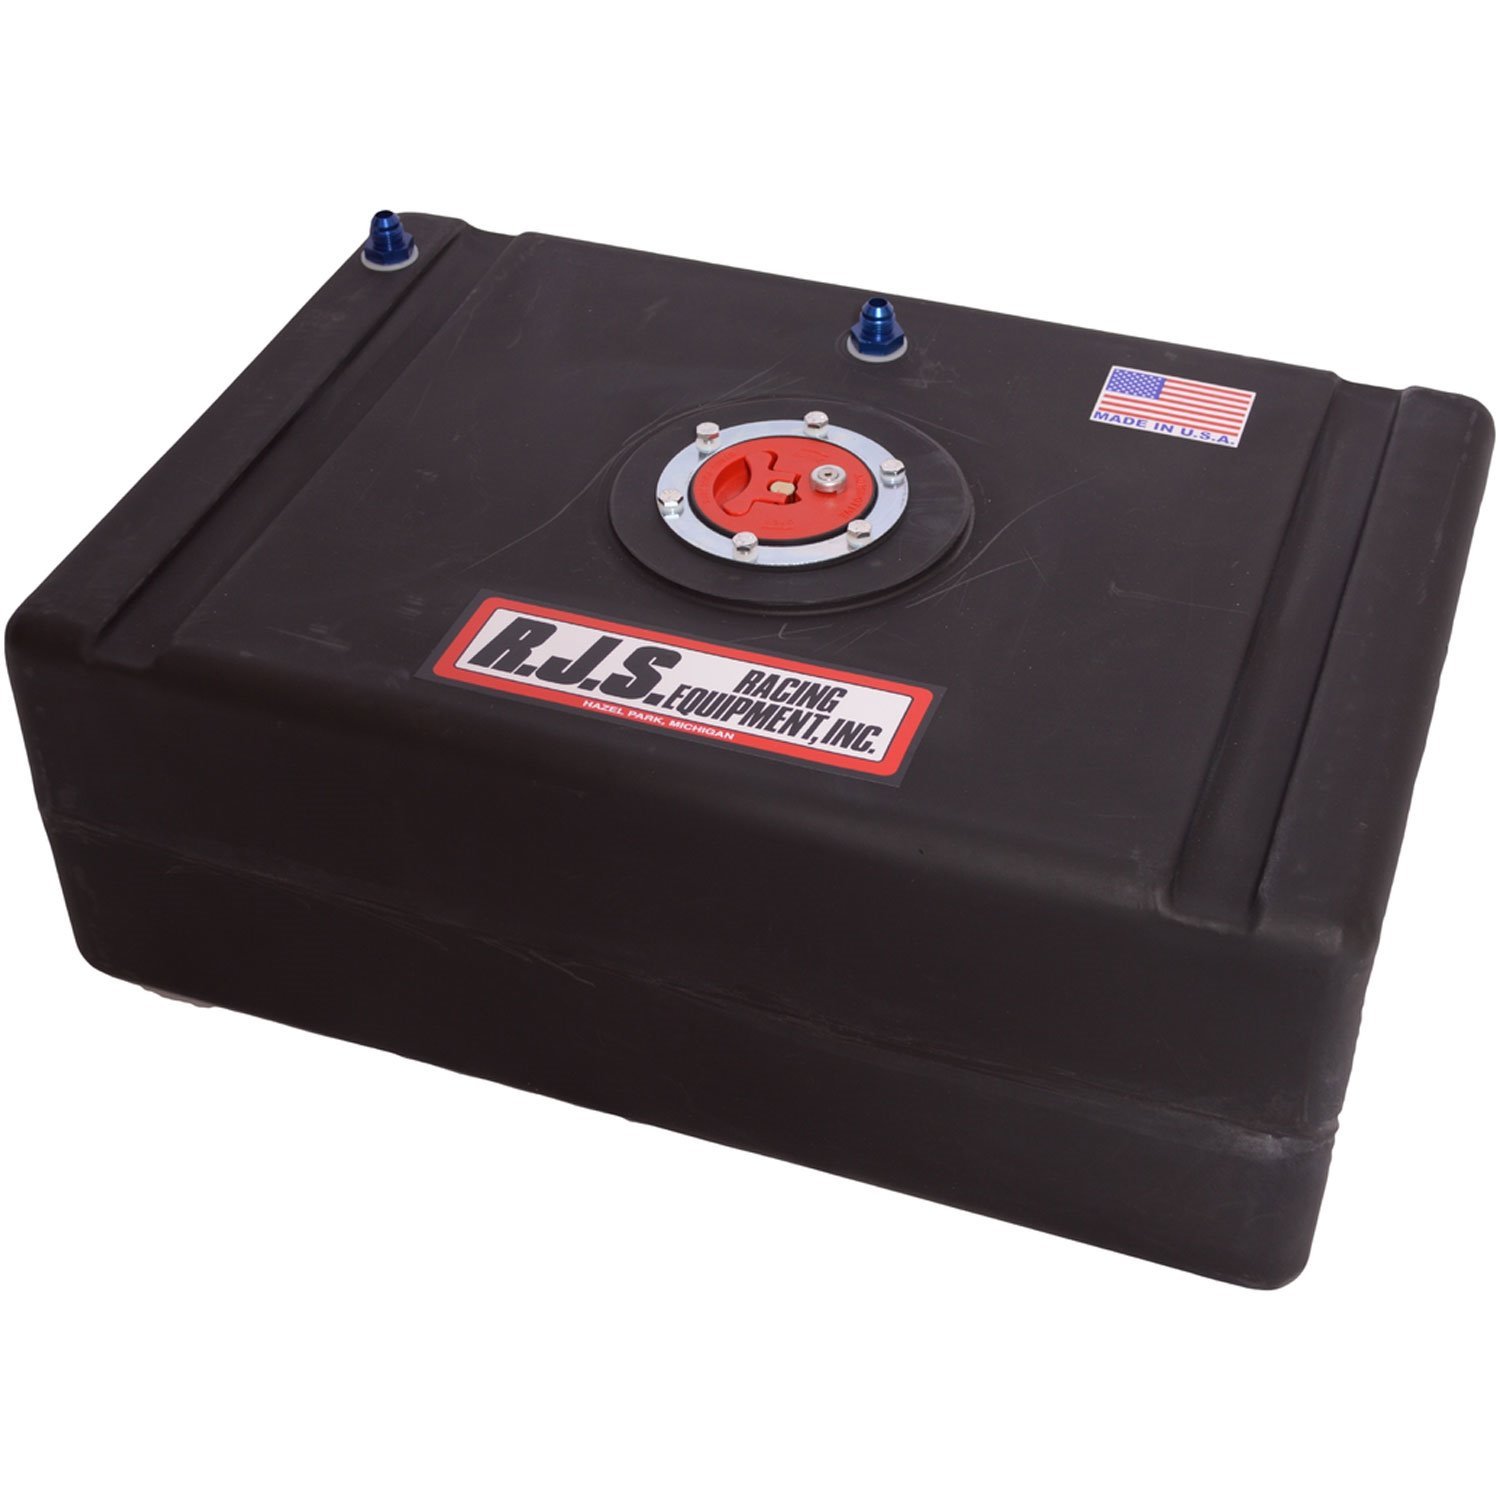 15 Gallon Economy Fuel Cell with Aircraft Style Filler Cap